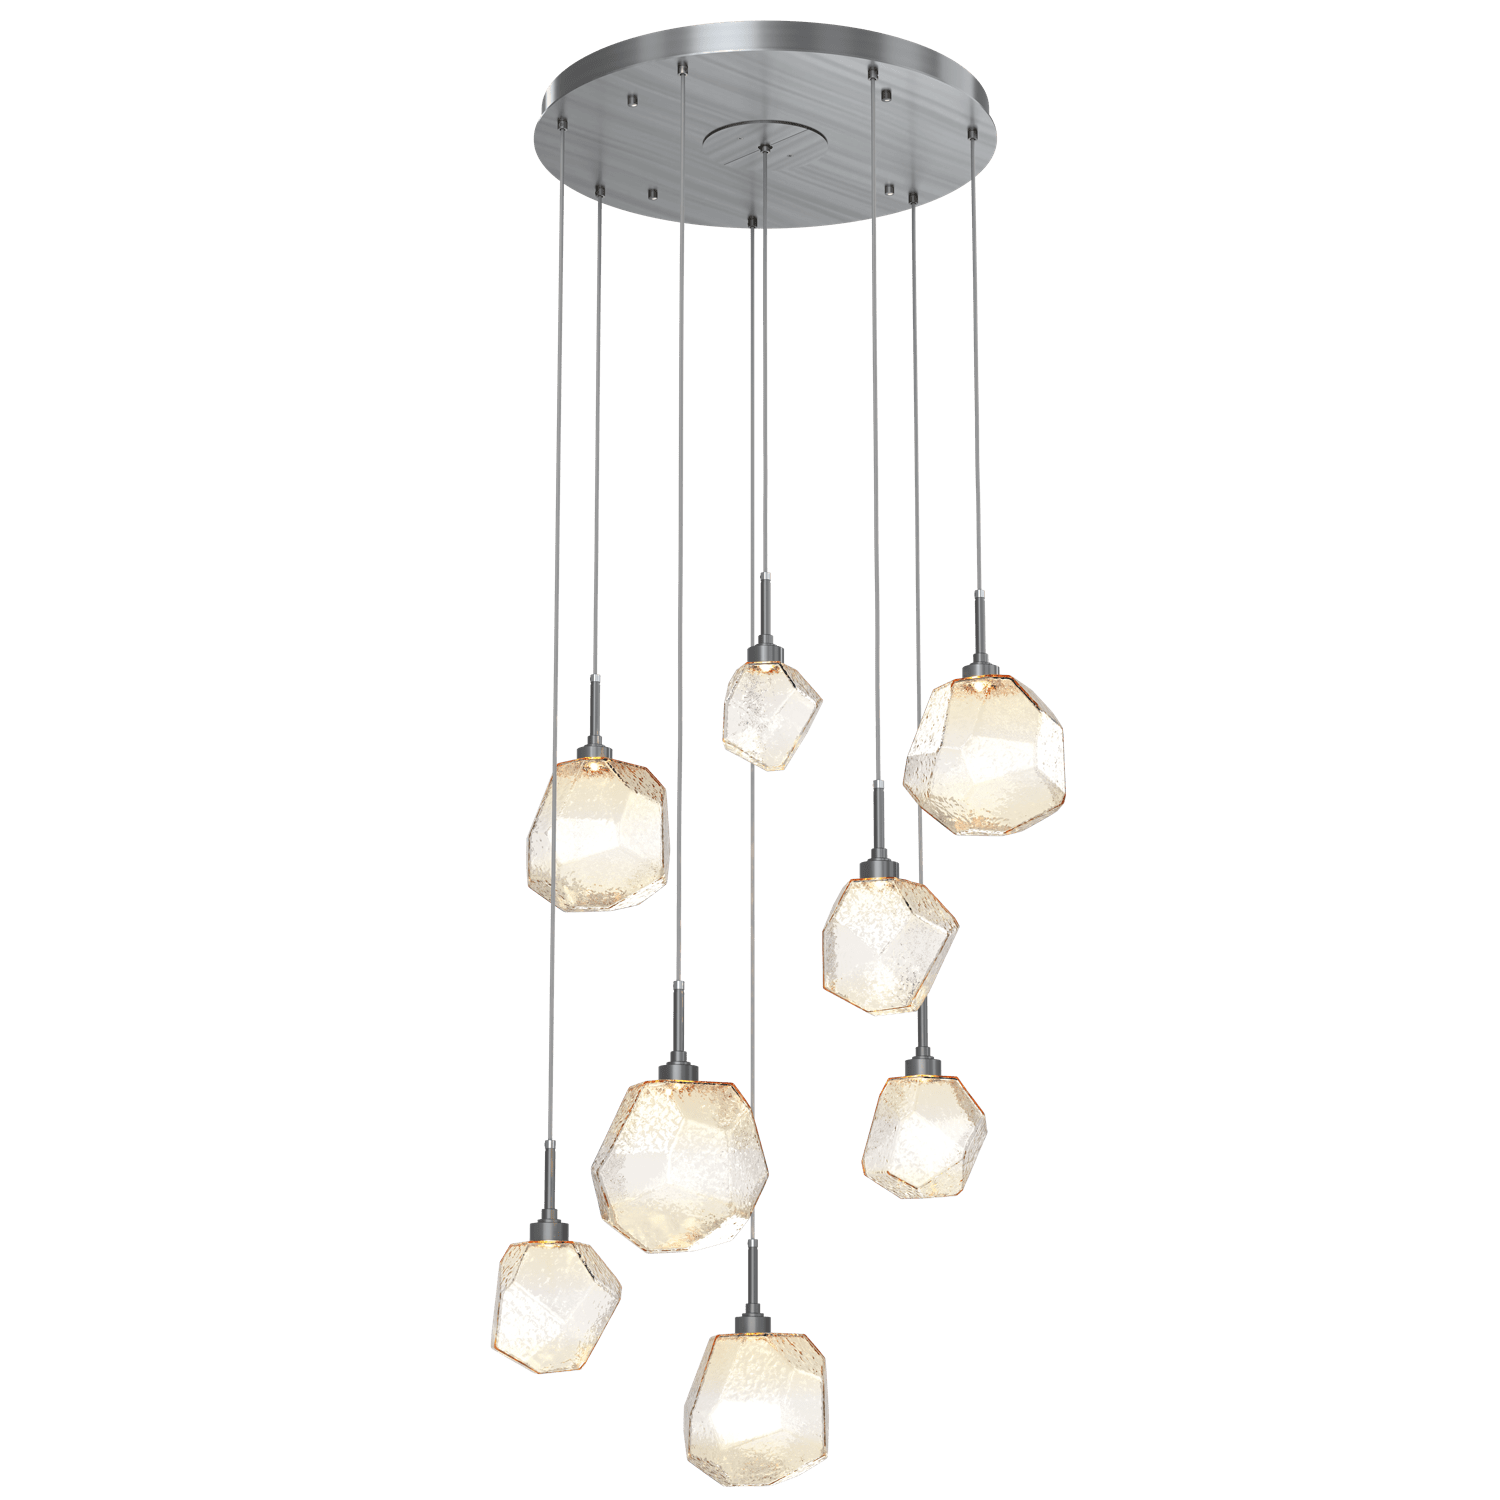 CHB0039-08-GM-A-Hammerton-Studio-Gem-8-light-round-pendant-chandelier-with-gunmetal-finish-and-amber-blown-glass-shades-and-LED-lamping